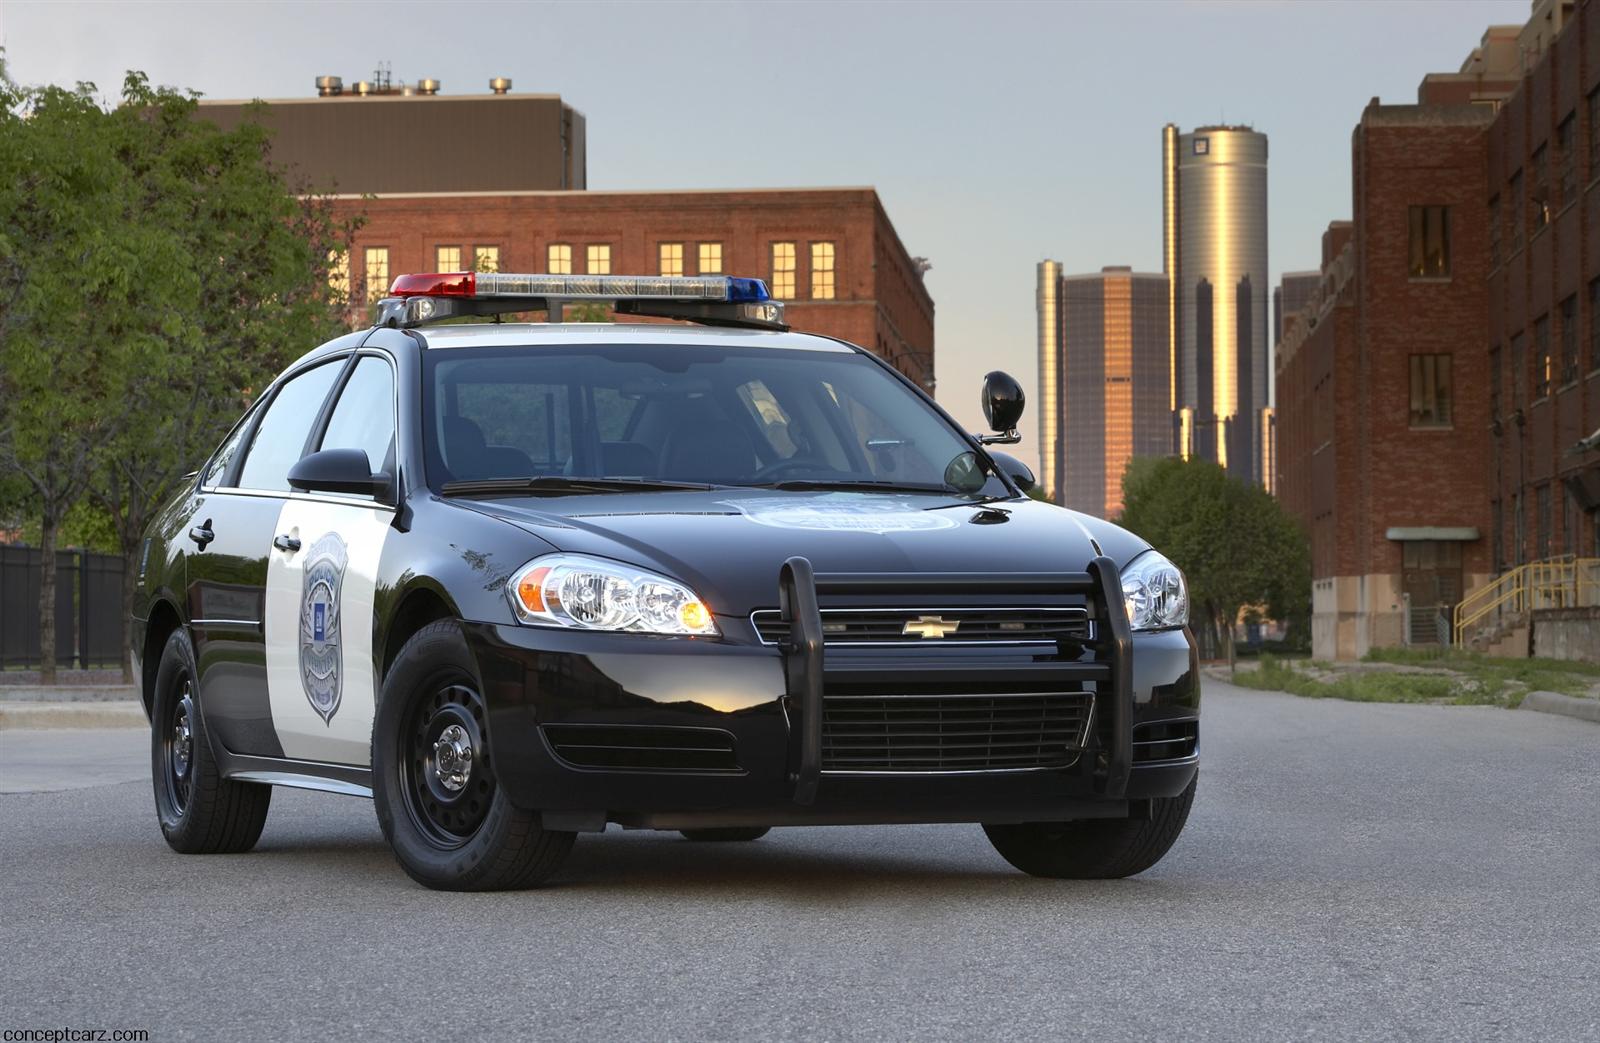 2011 Chevrolet Impala Police Package